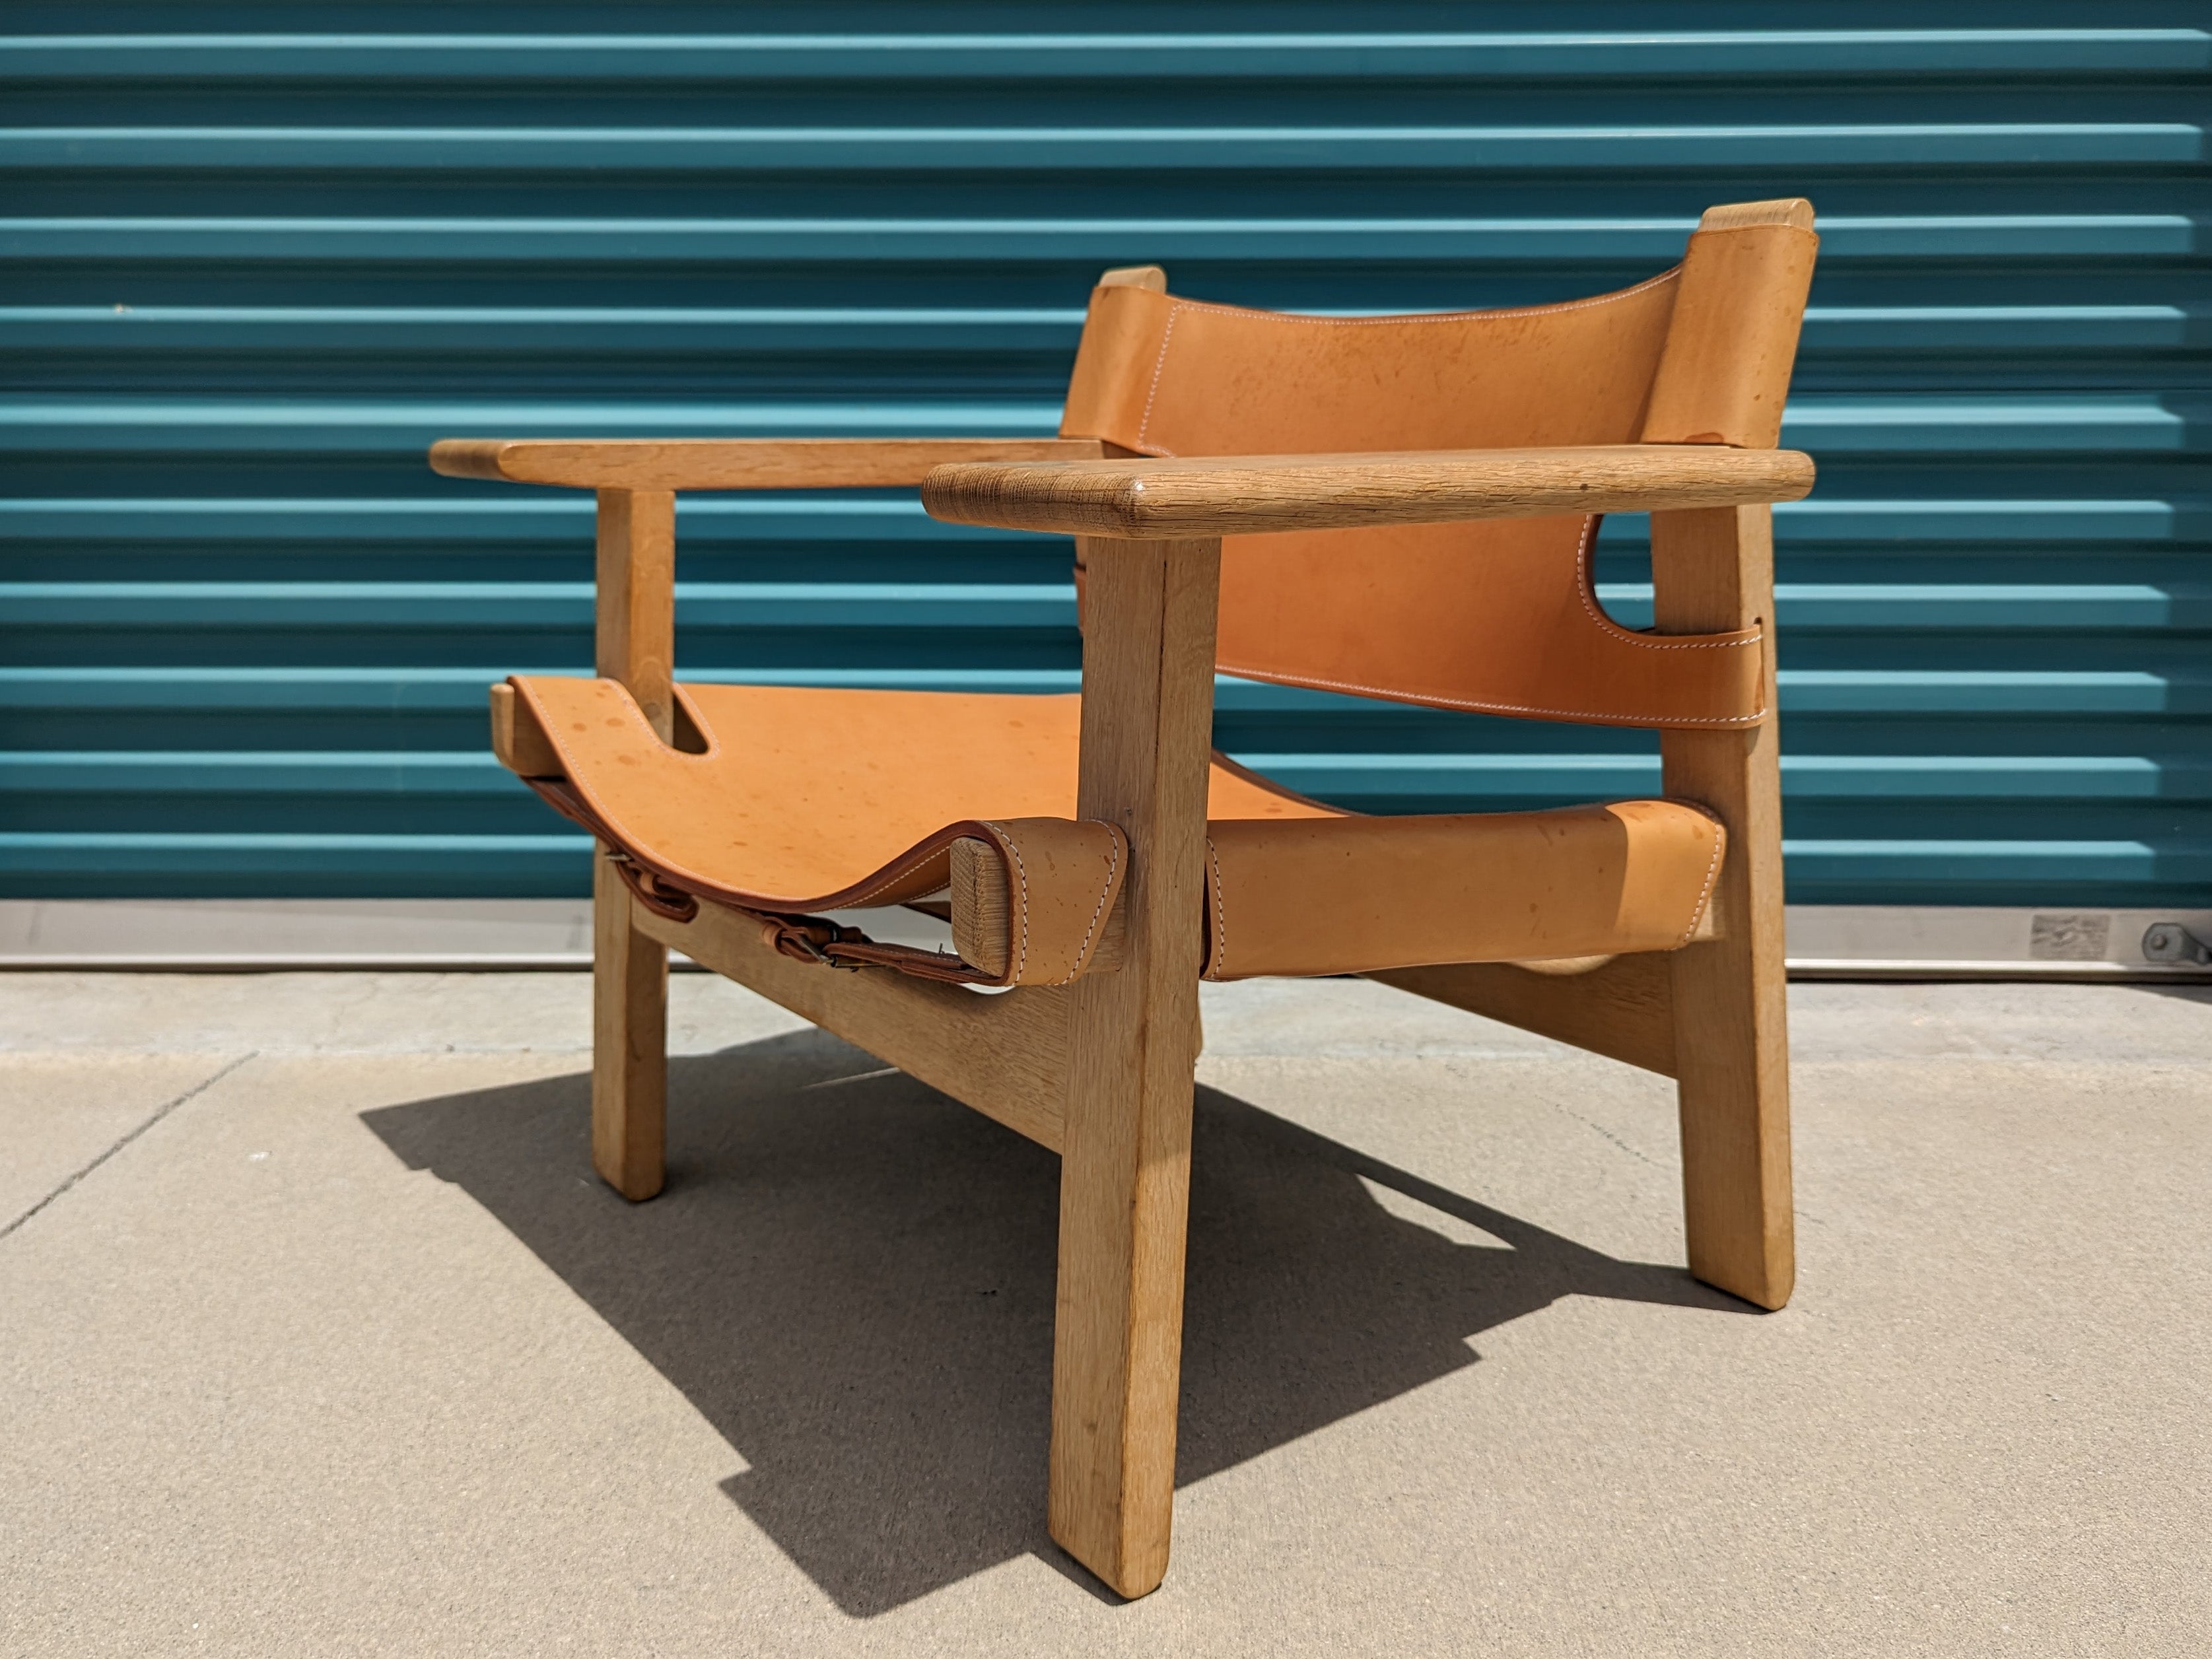 20th Century Mid Century Modern Spanish Chair by Børge Mogensen for Fredericia Furniture